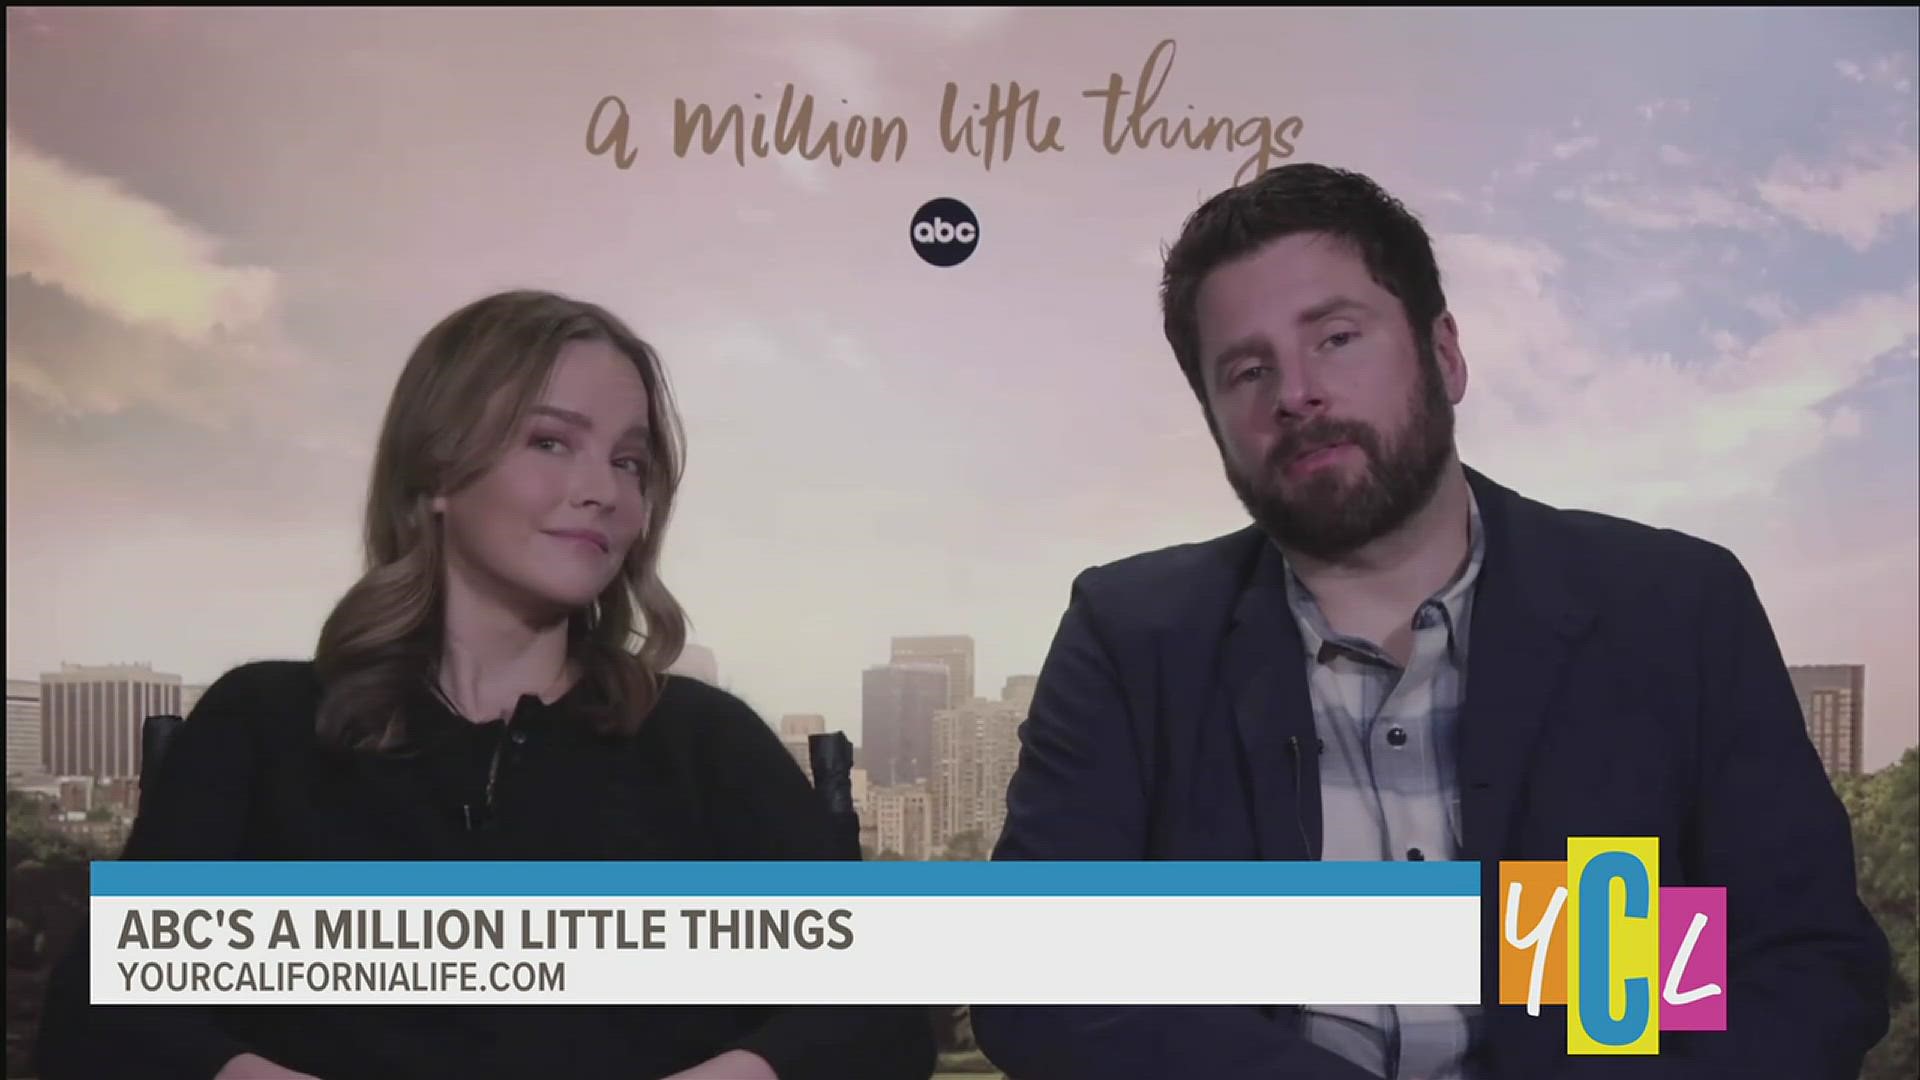 It’s the beginning of the end of ABC’s hit drama, A Million Little Things. We caught up with the stars, James Roday Rodriguez and Allison Miller.